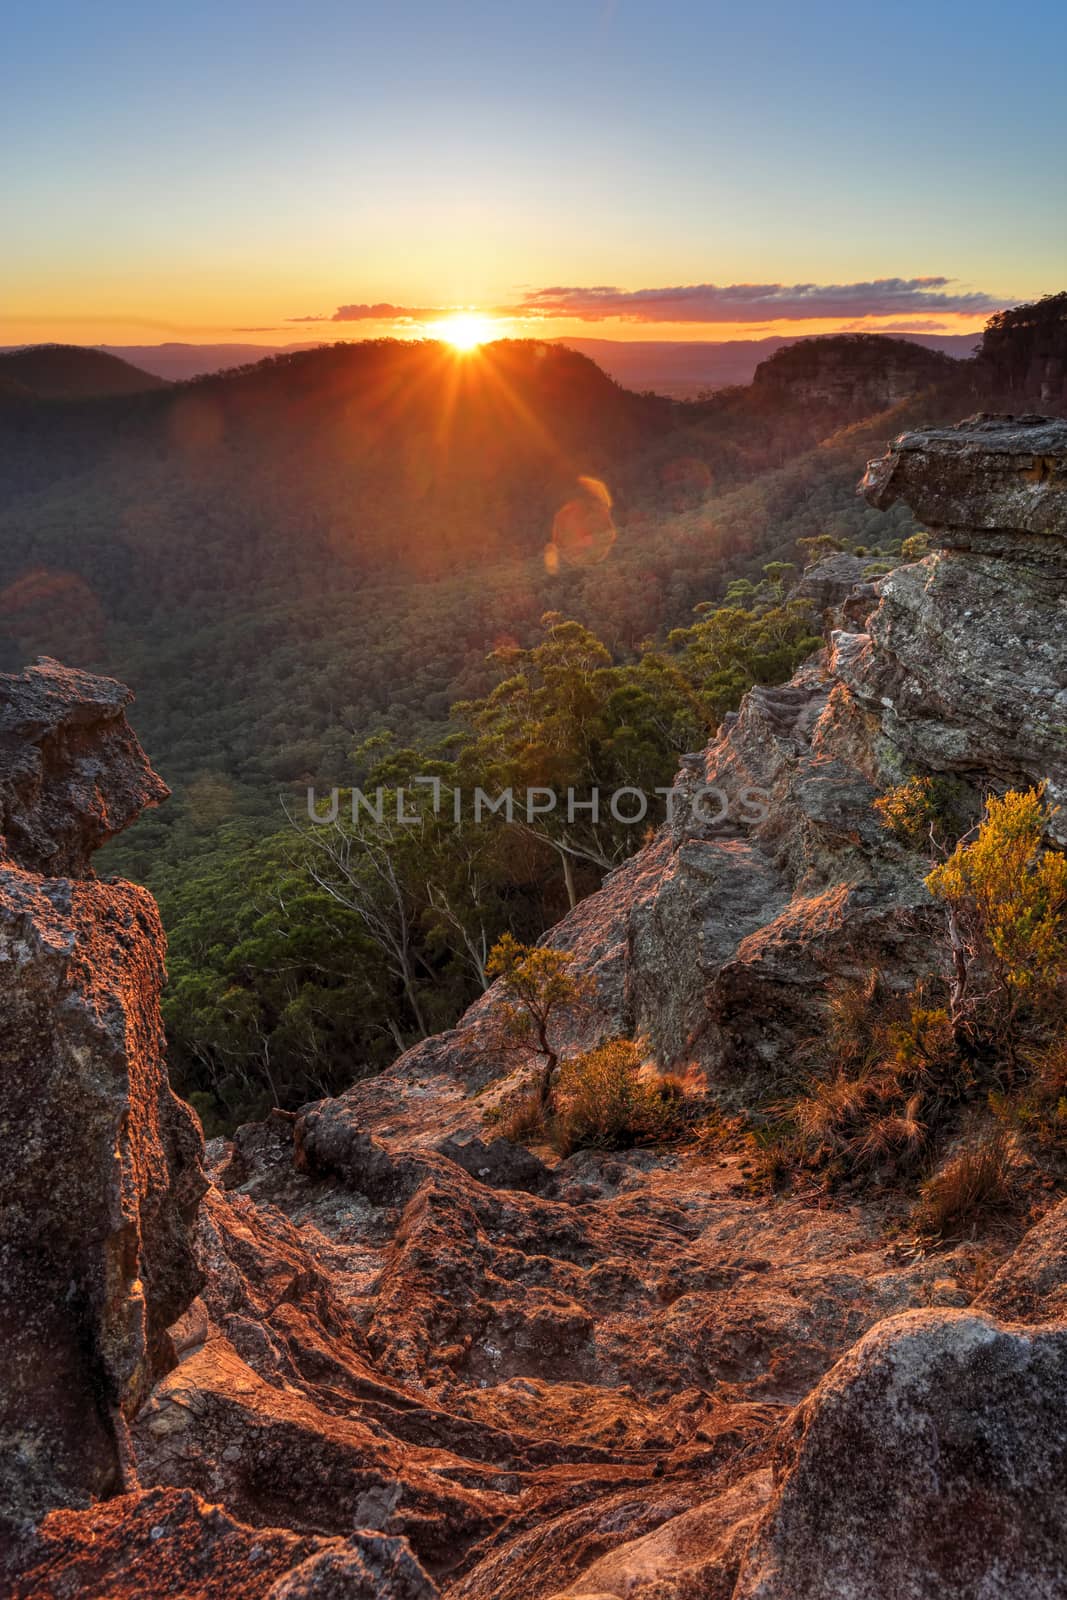 The last rays of sunshine stream over Wilsons Gully and the valley and highlight the foreground cliffs and rock ledges and foliage.  Sunset views from Sunset Rock, Mt Victoria in the Blue Mountains, Australia